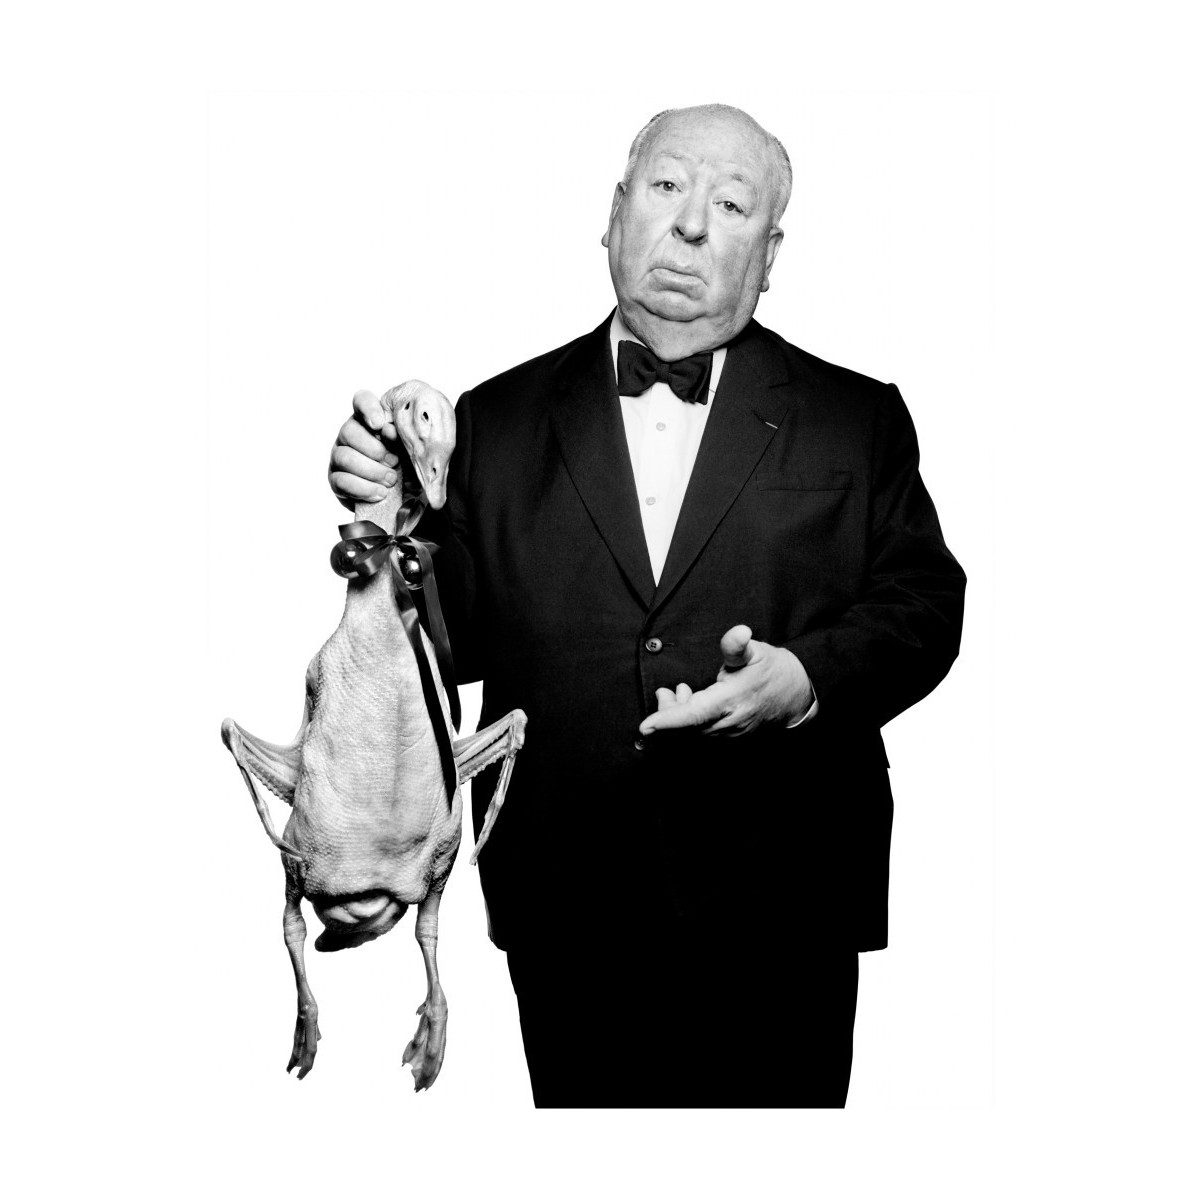 Photo Alfred Hitchcock